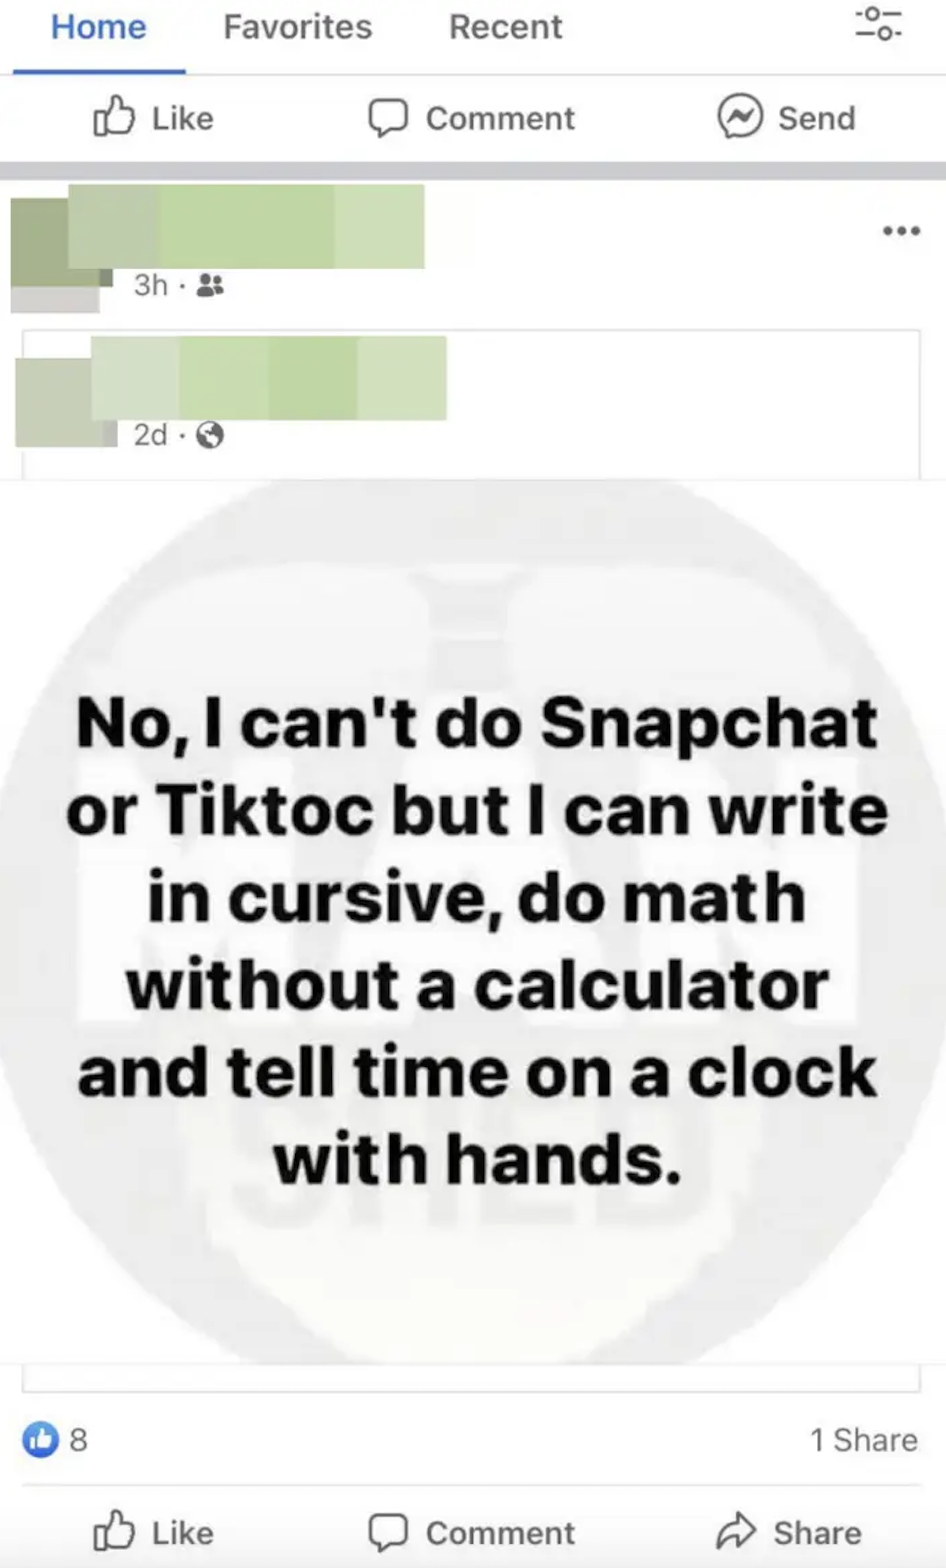 unhinged boomer post - no, I can't do snapchat of tiktok